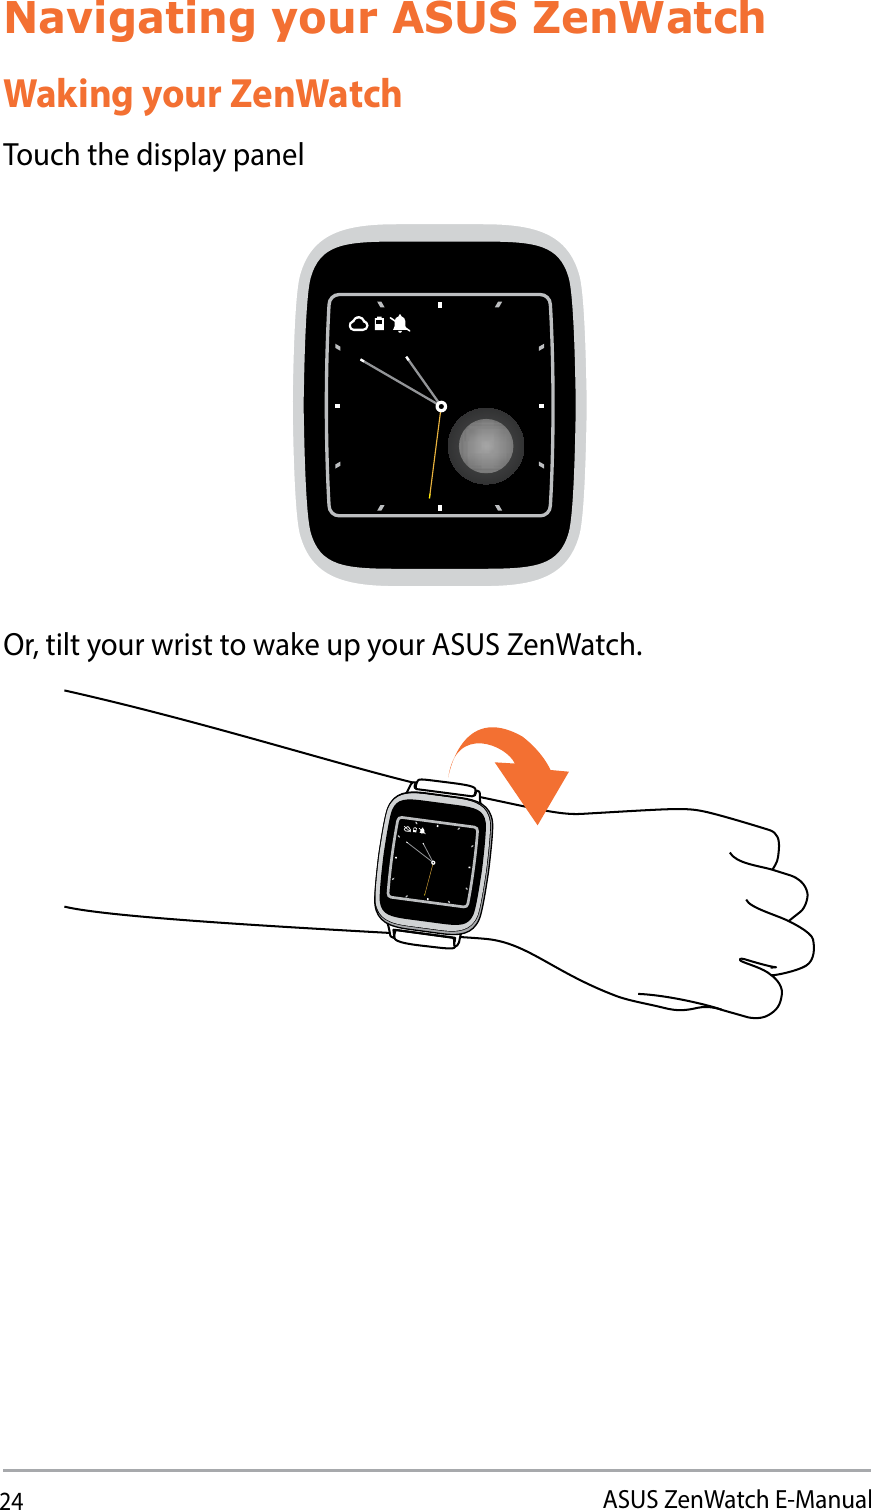 24ASUS ZenWatch E-ManualNavigating your ASUS ZenWatchWaking your ZenWatchTouch the display panelOr, tilt your wrist to wake up your ASUS ZenWatch.